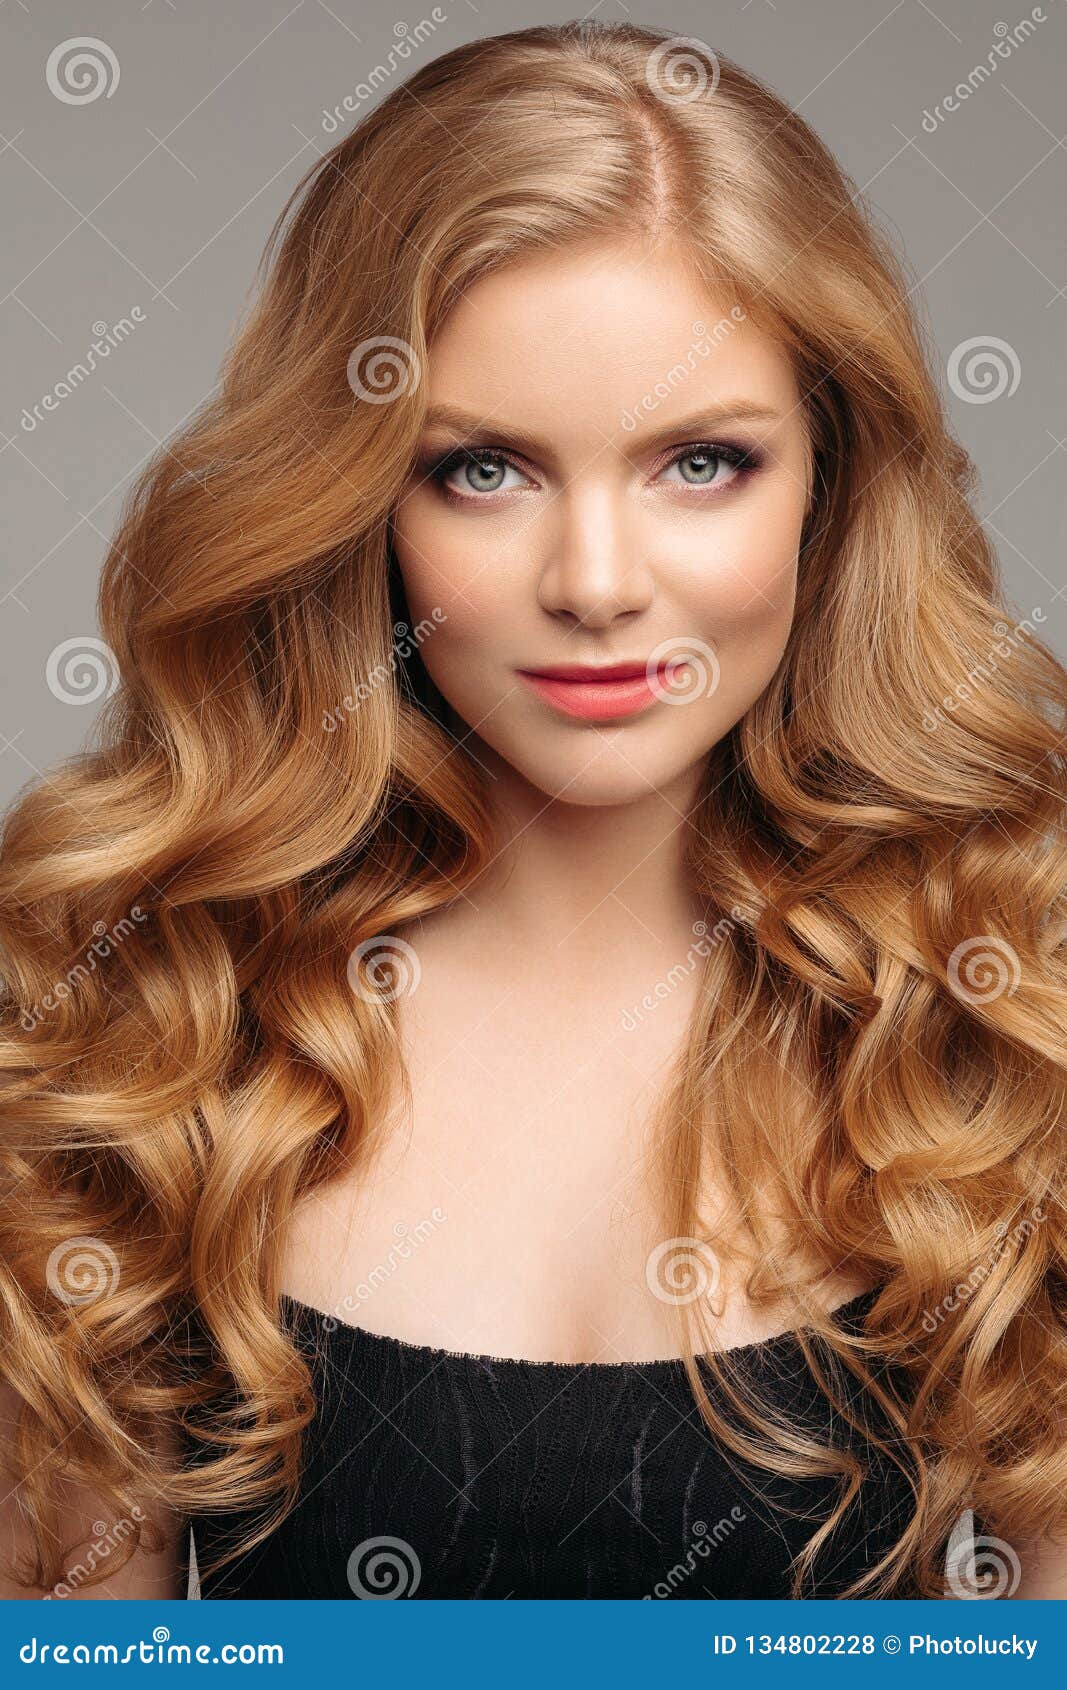 Stunning Natural Beauty with Blonde Wavy Hair. Stock Photo - Image of fair,  lady: 134802228